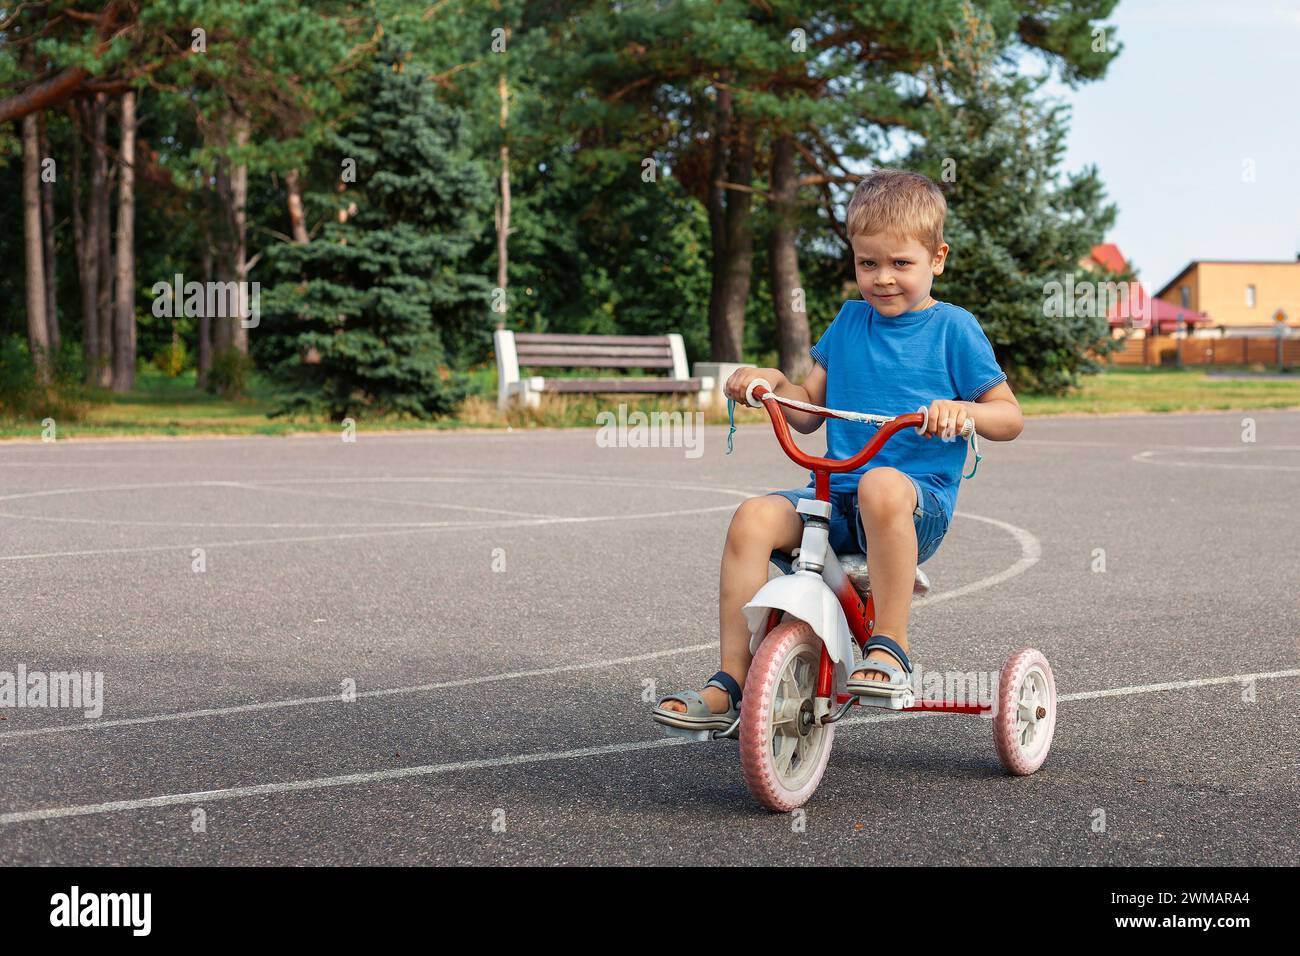 Smiling cute boy in blue clothes is riding a tricycle in a park lot. Stock Photo